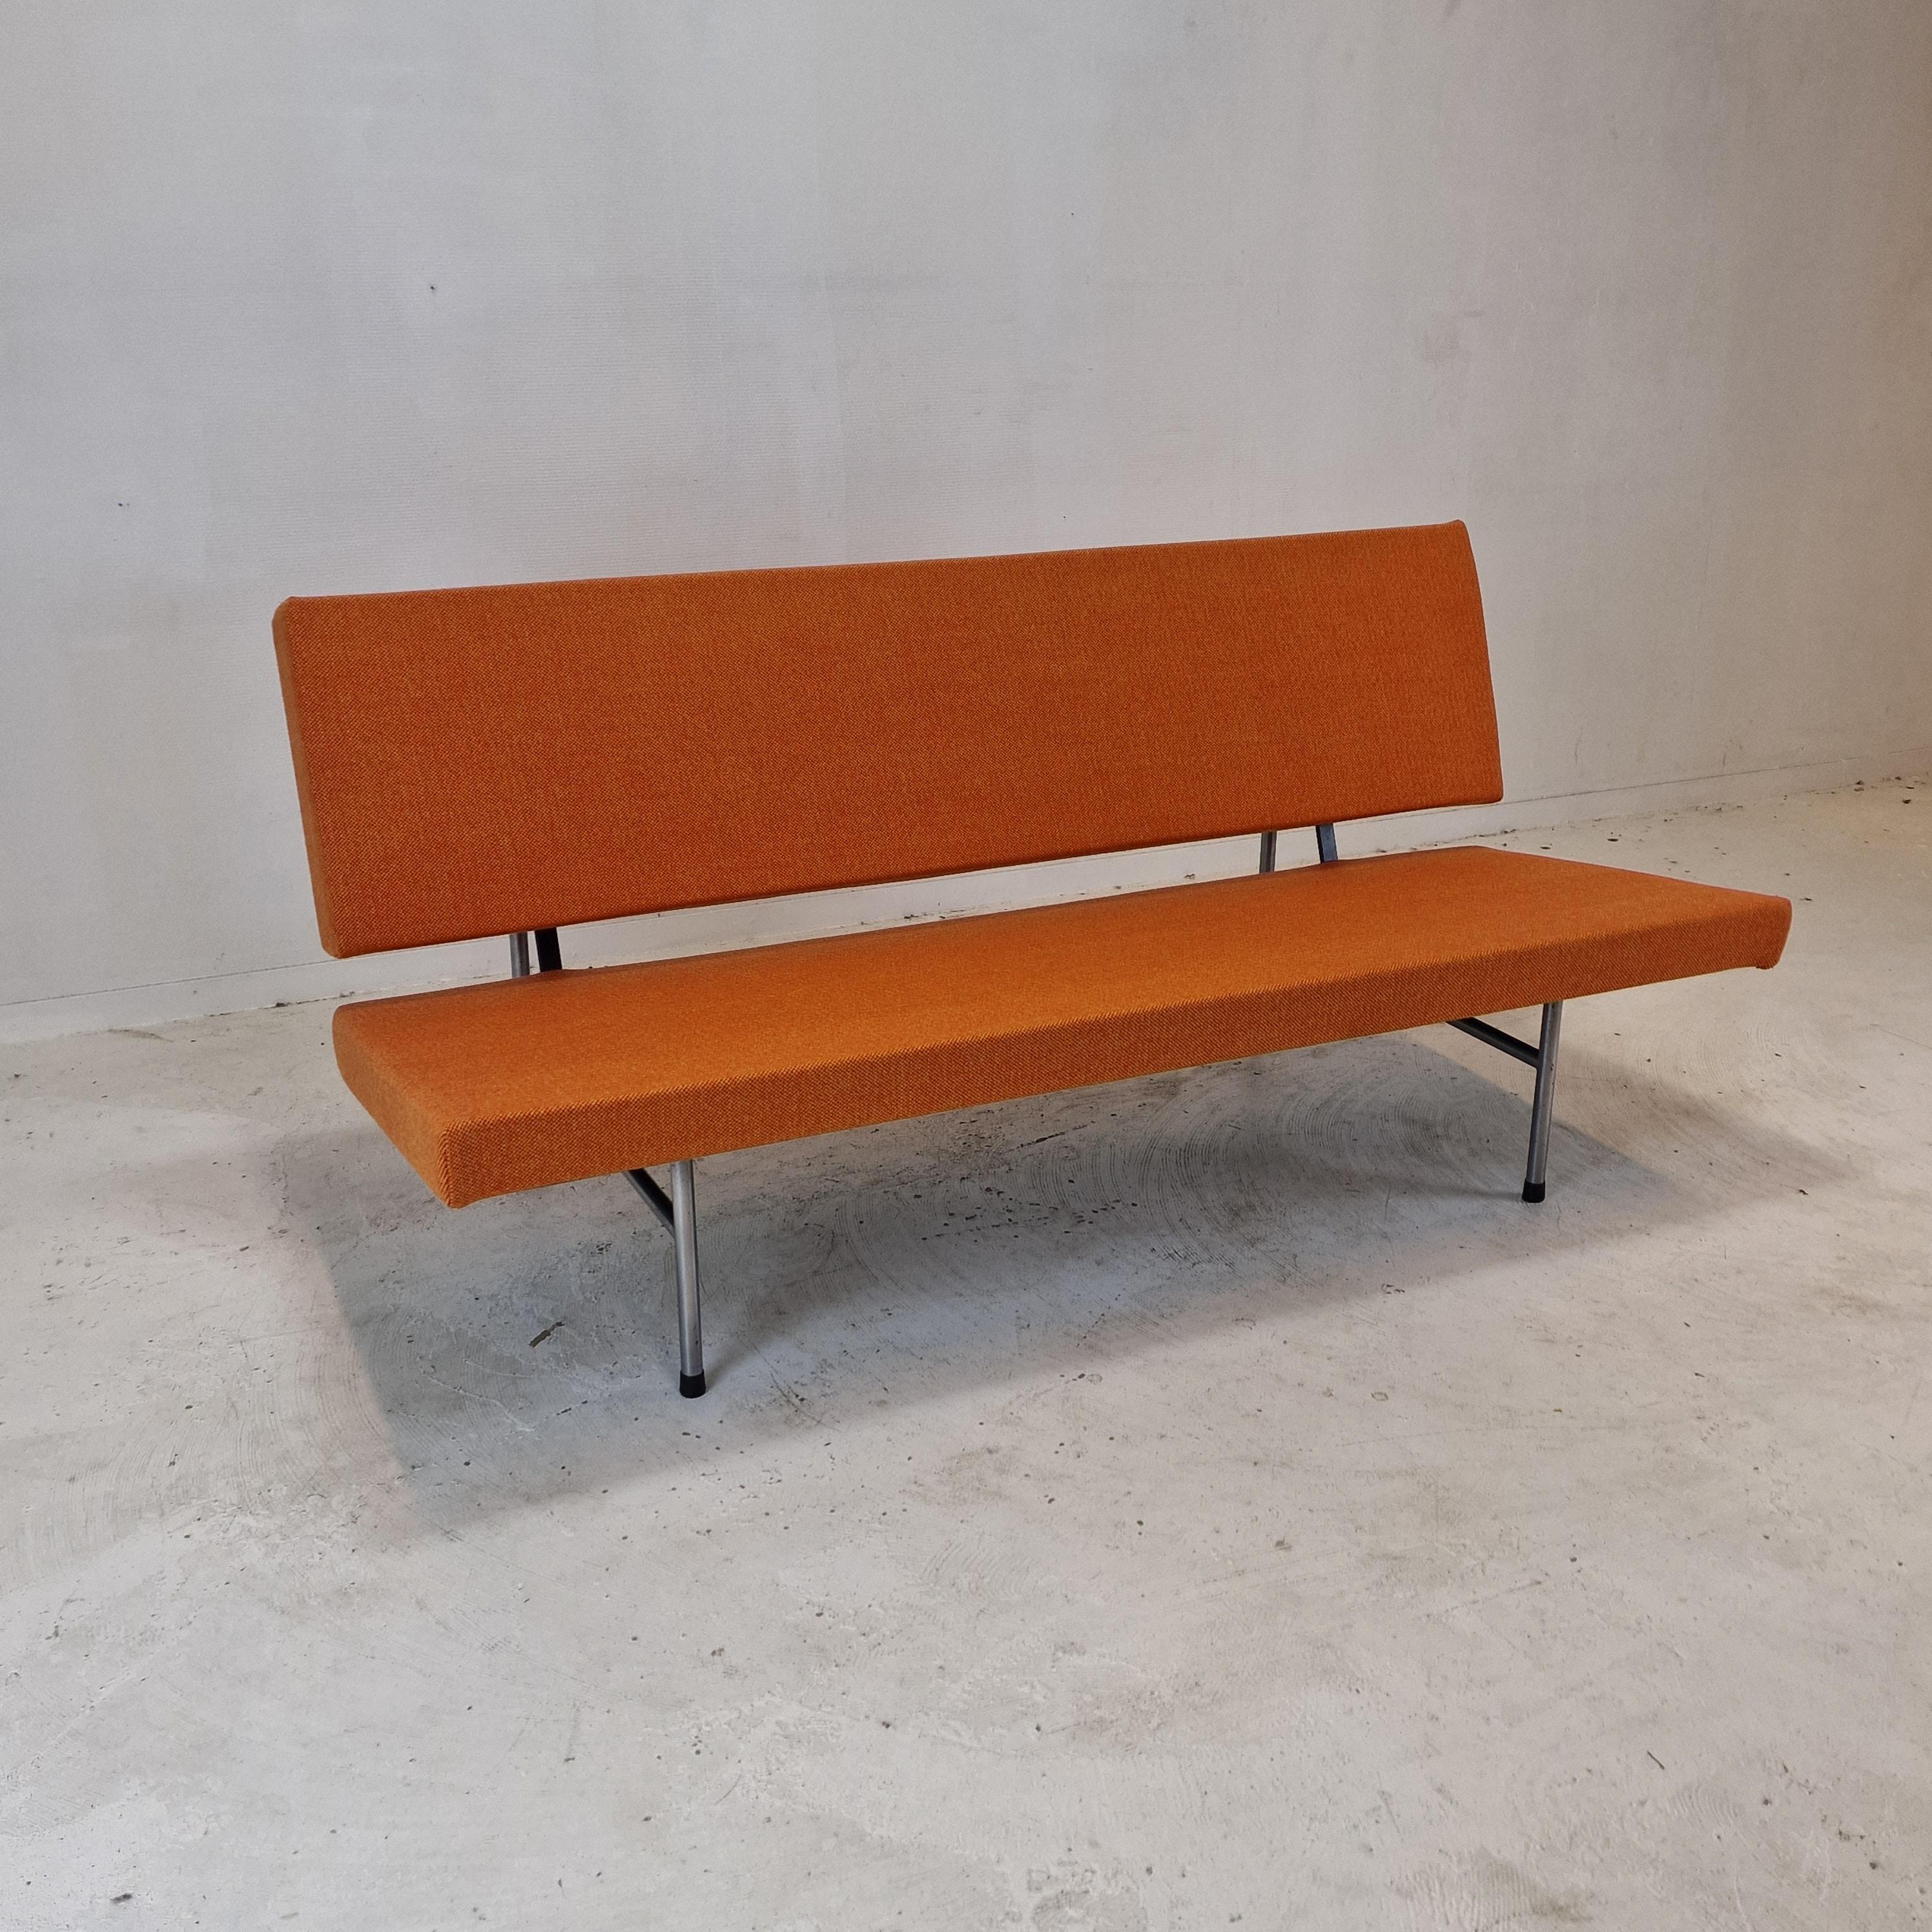 Dutch Midcentury 2-Seat Sofa by A.R. Cordemeyer for Gispen, 1960s For Sale